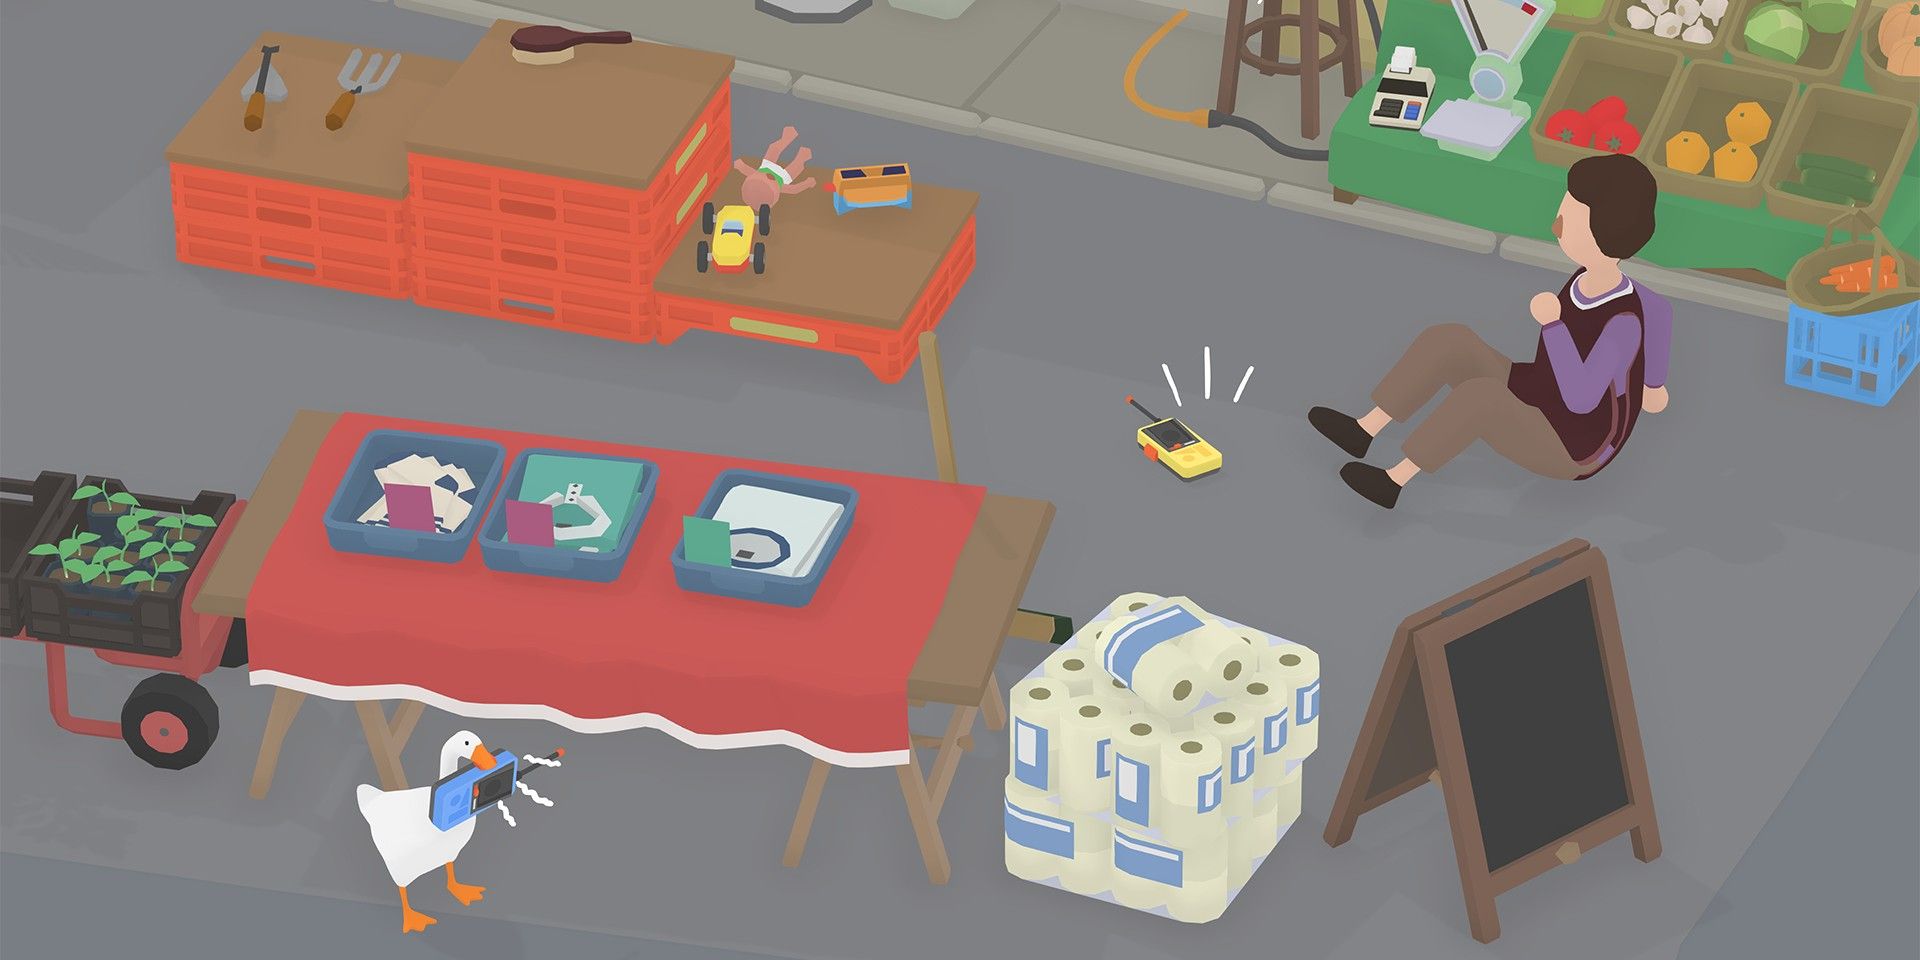 The goose taunts the shopkeep with a walkie-talkie in Untitled Goose Game